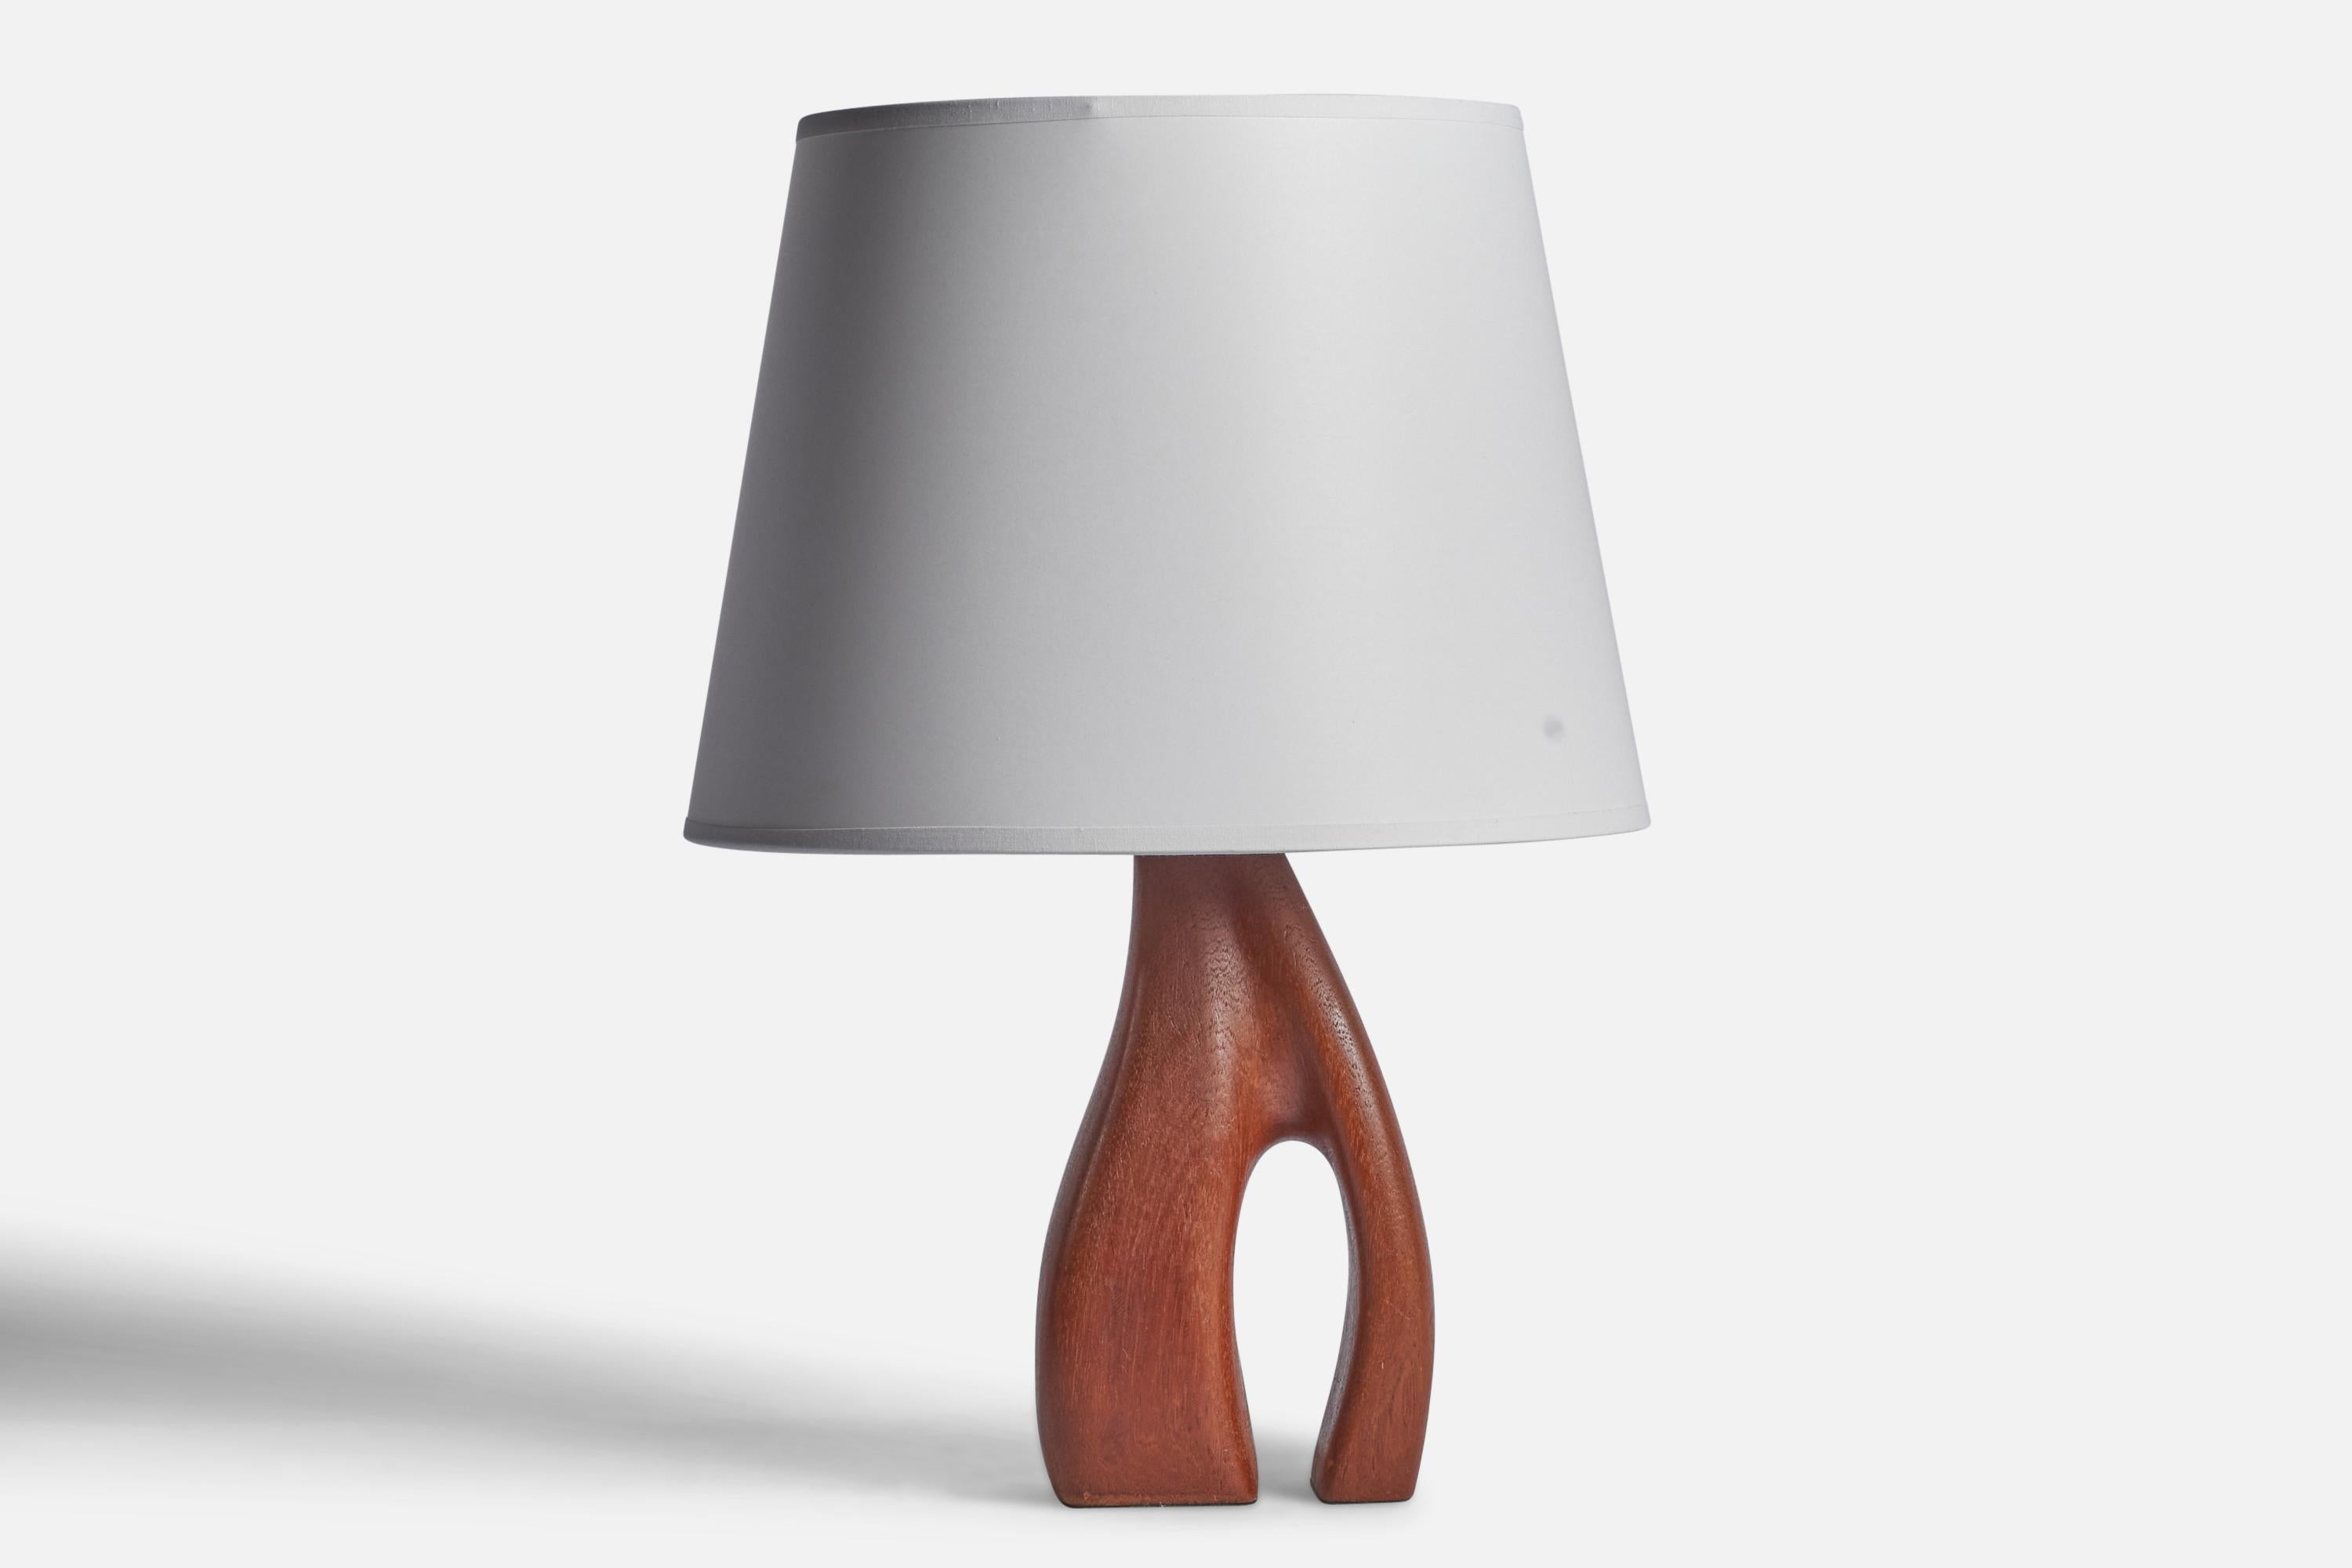 A freeform teak table lamp designed and produced in Sweden, 1950s.

Dimensions of Lamp (inches): 8.5” H x 4.75” Diameter
Dimensions of Shade (inches): 8.75” Top Diameter x 12” Bottom Diameter x 9” H 
Dimensions of Lamp with Shade (inches): 15” H x